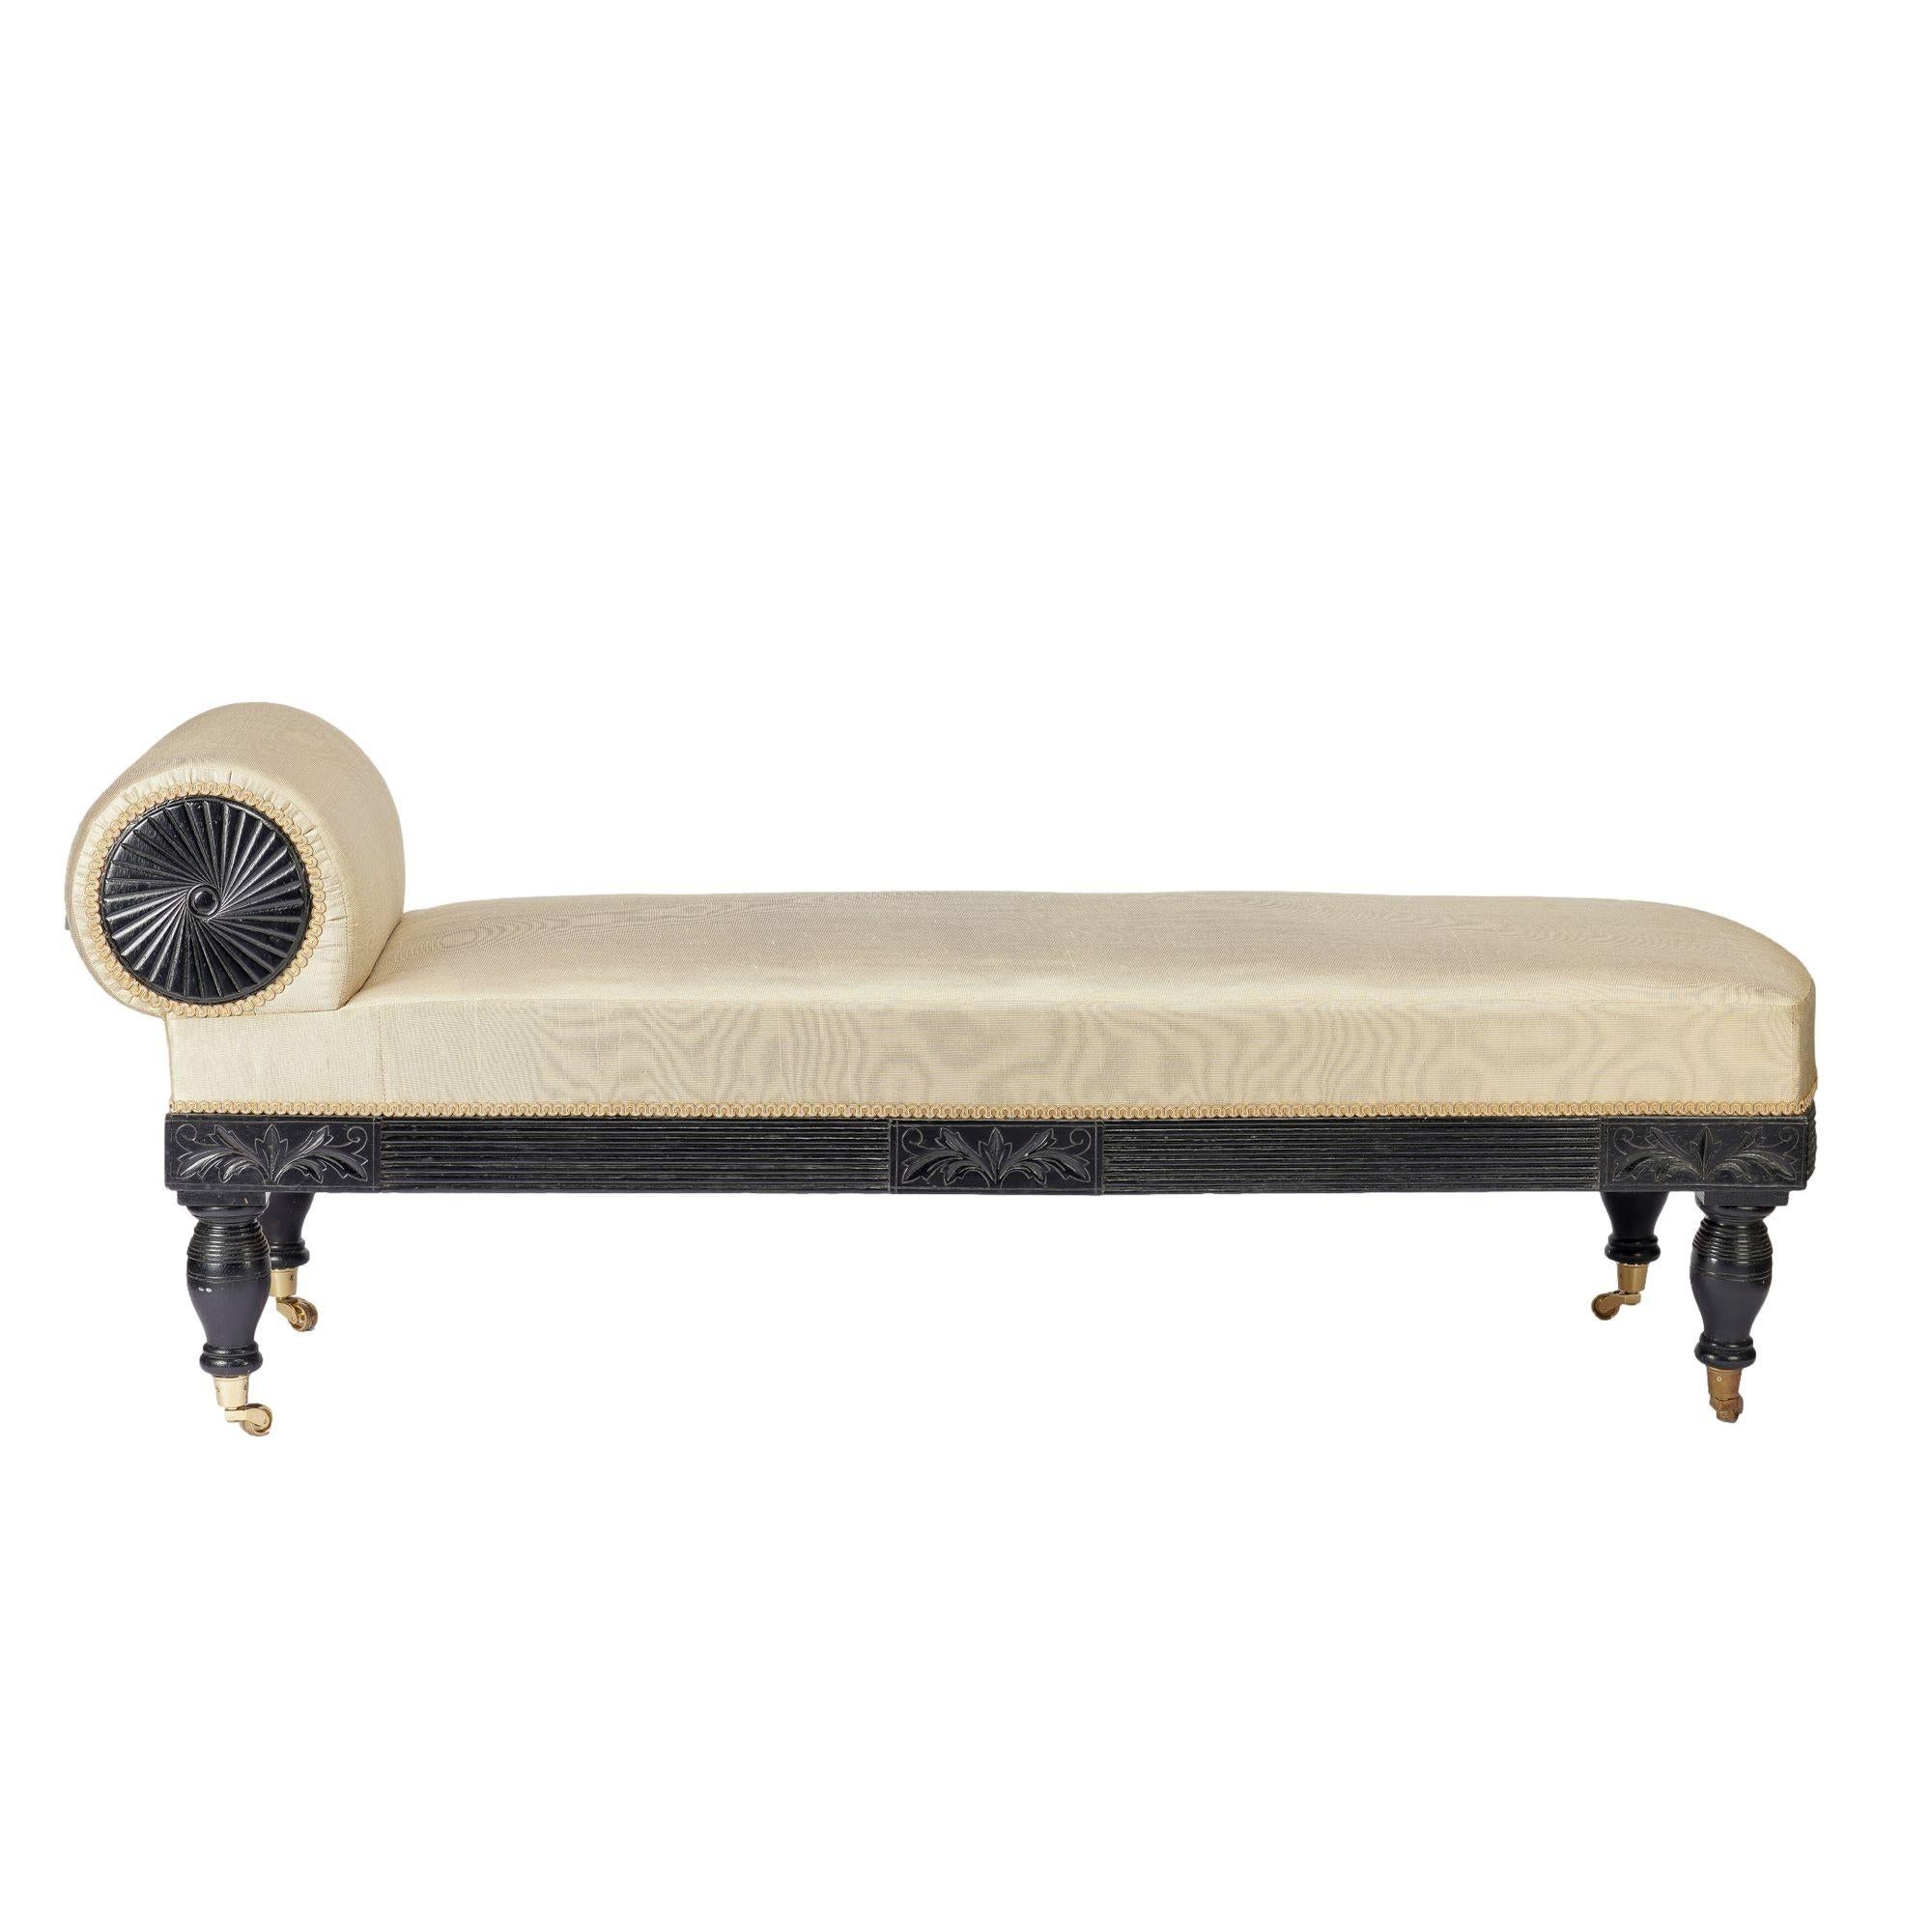 American Eastlake upholstered chaise in ebonized walnut with brass casters, 1888 For Sale 1